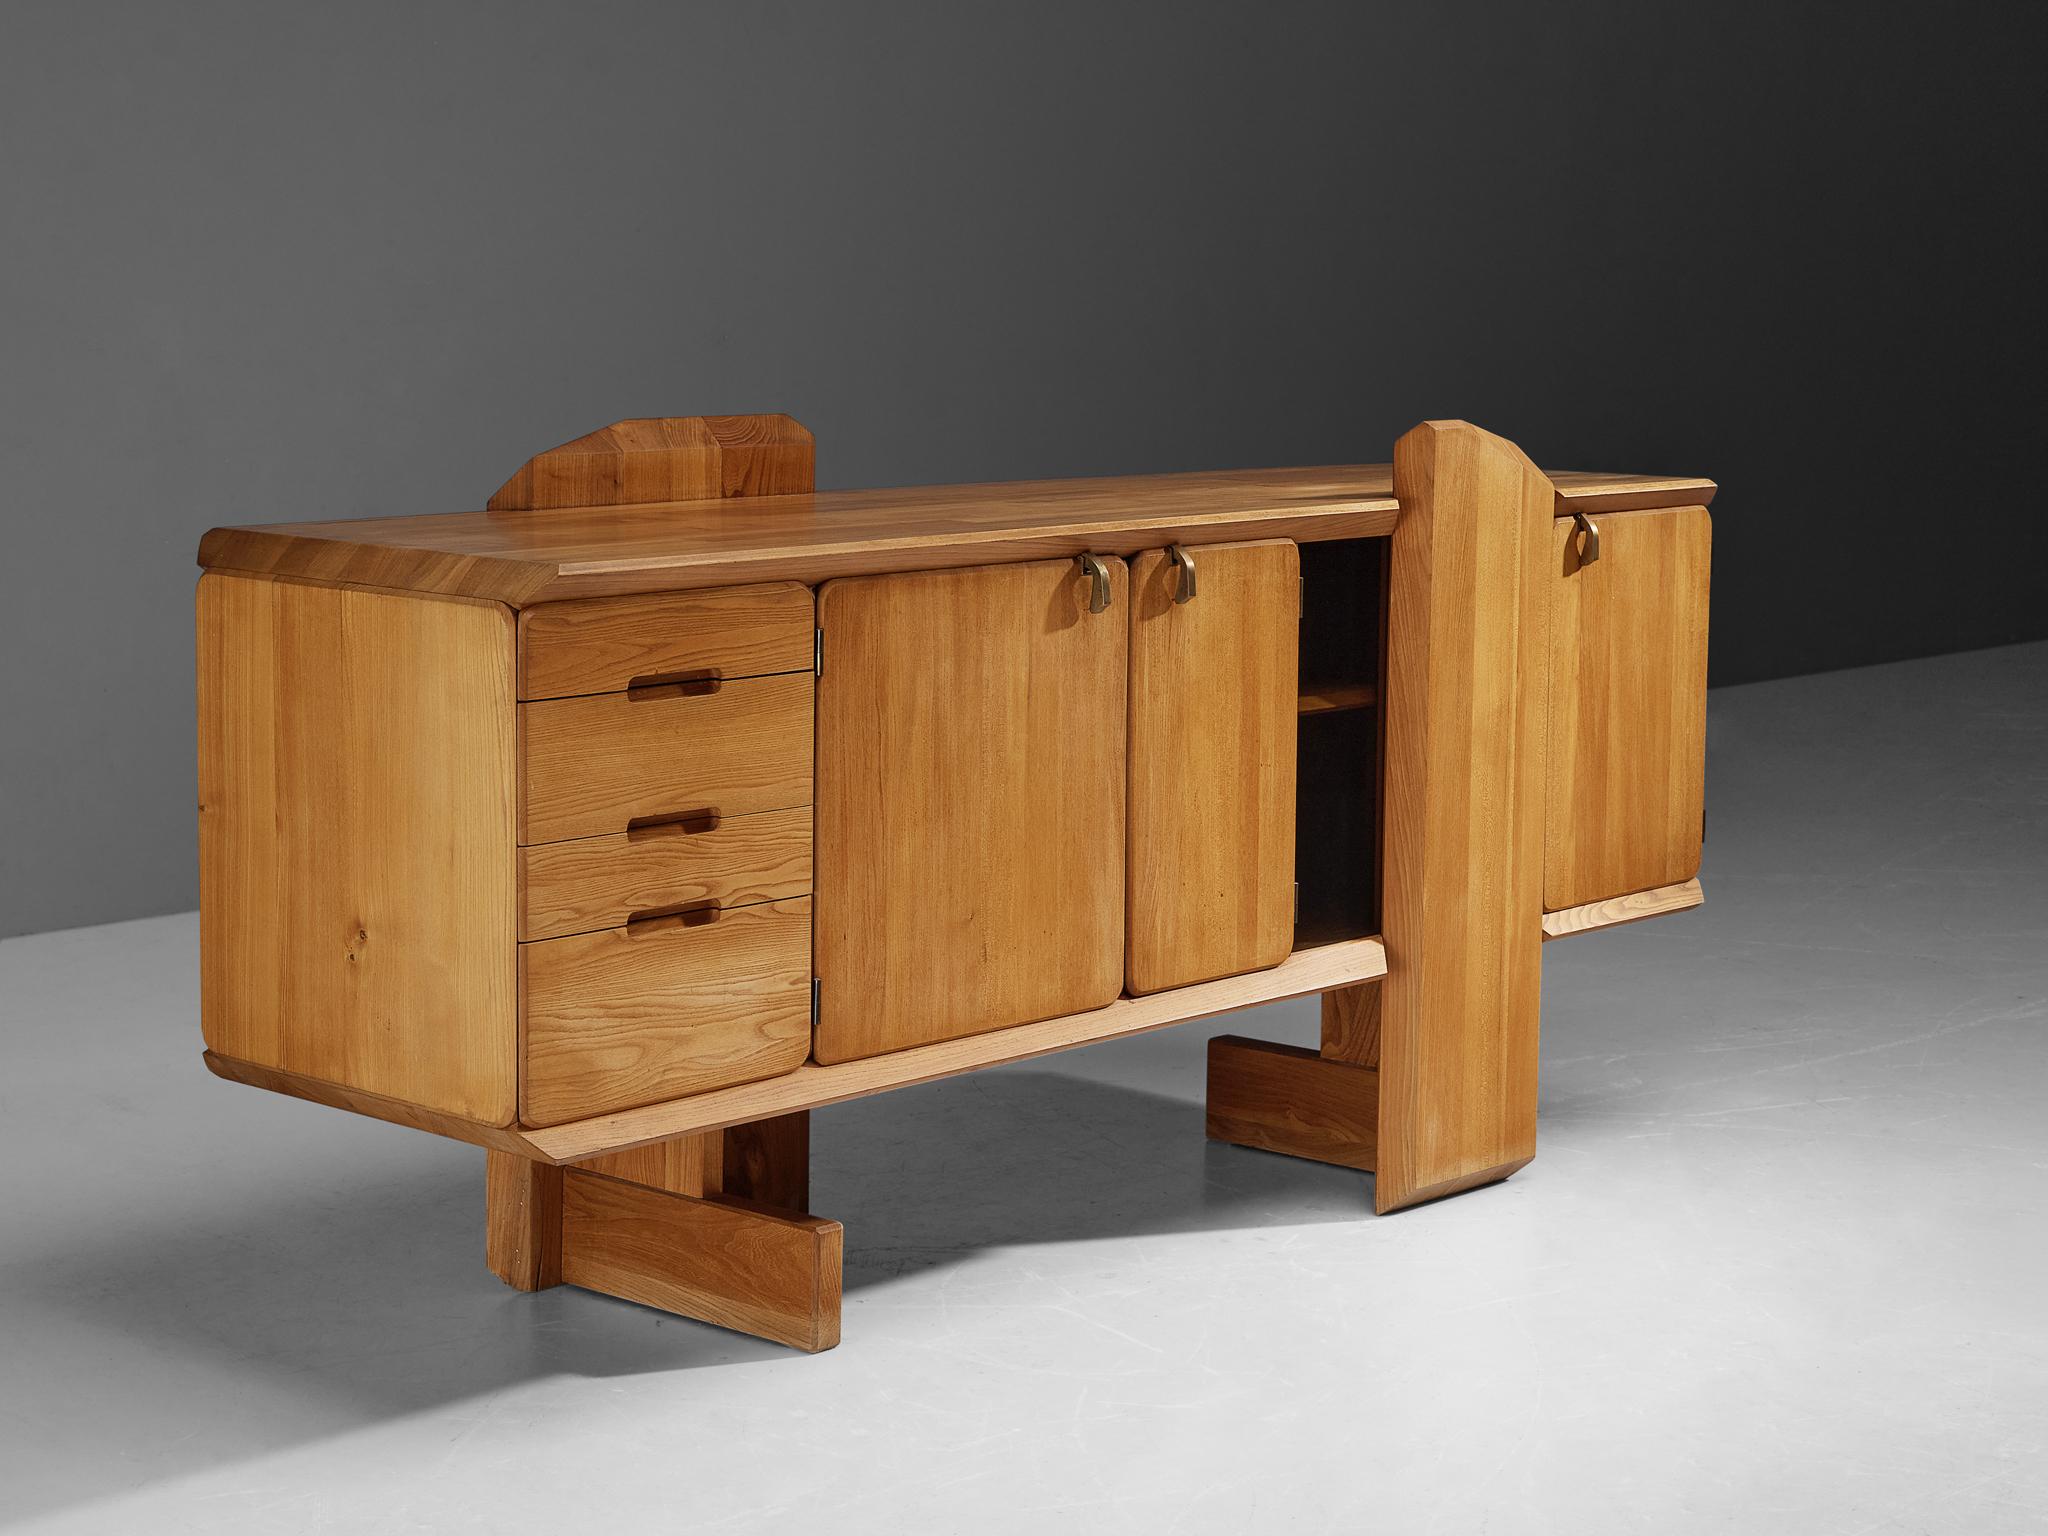 Pierre Chapo, sideboard, model 'R28', elm, France, 1985.

This design is an early edition, created according to the original craft methodology of Pierre Chapo. The R28 sideboard was a break from other pieces designed by Pierre Chapo. From 1981